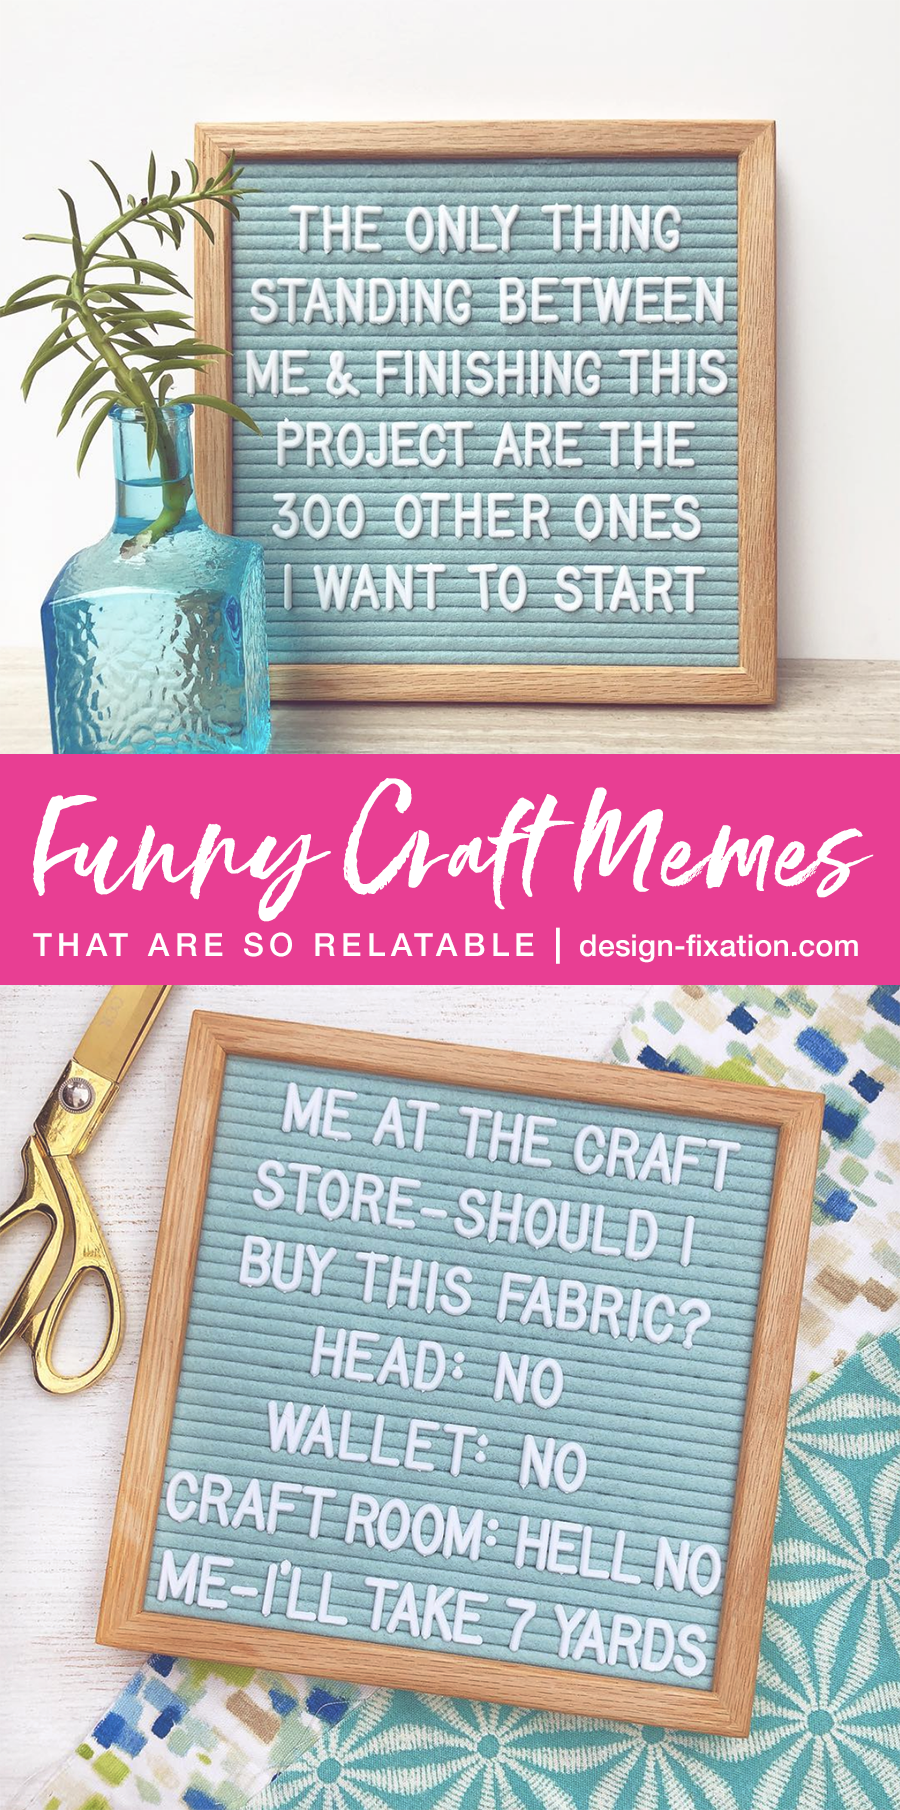 Funny Craft Memes That Are So Relatable /// By Design Fixation #funny #craft #memes #jokes #crafting